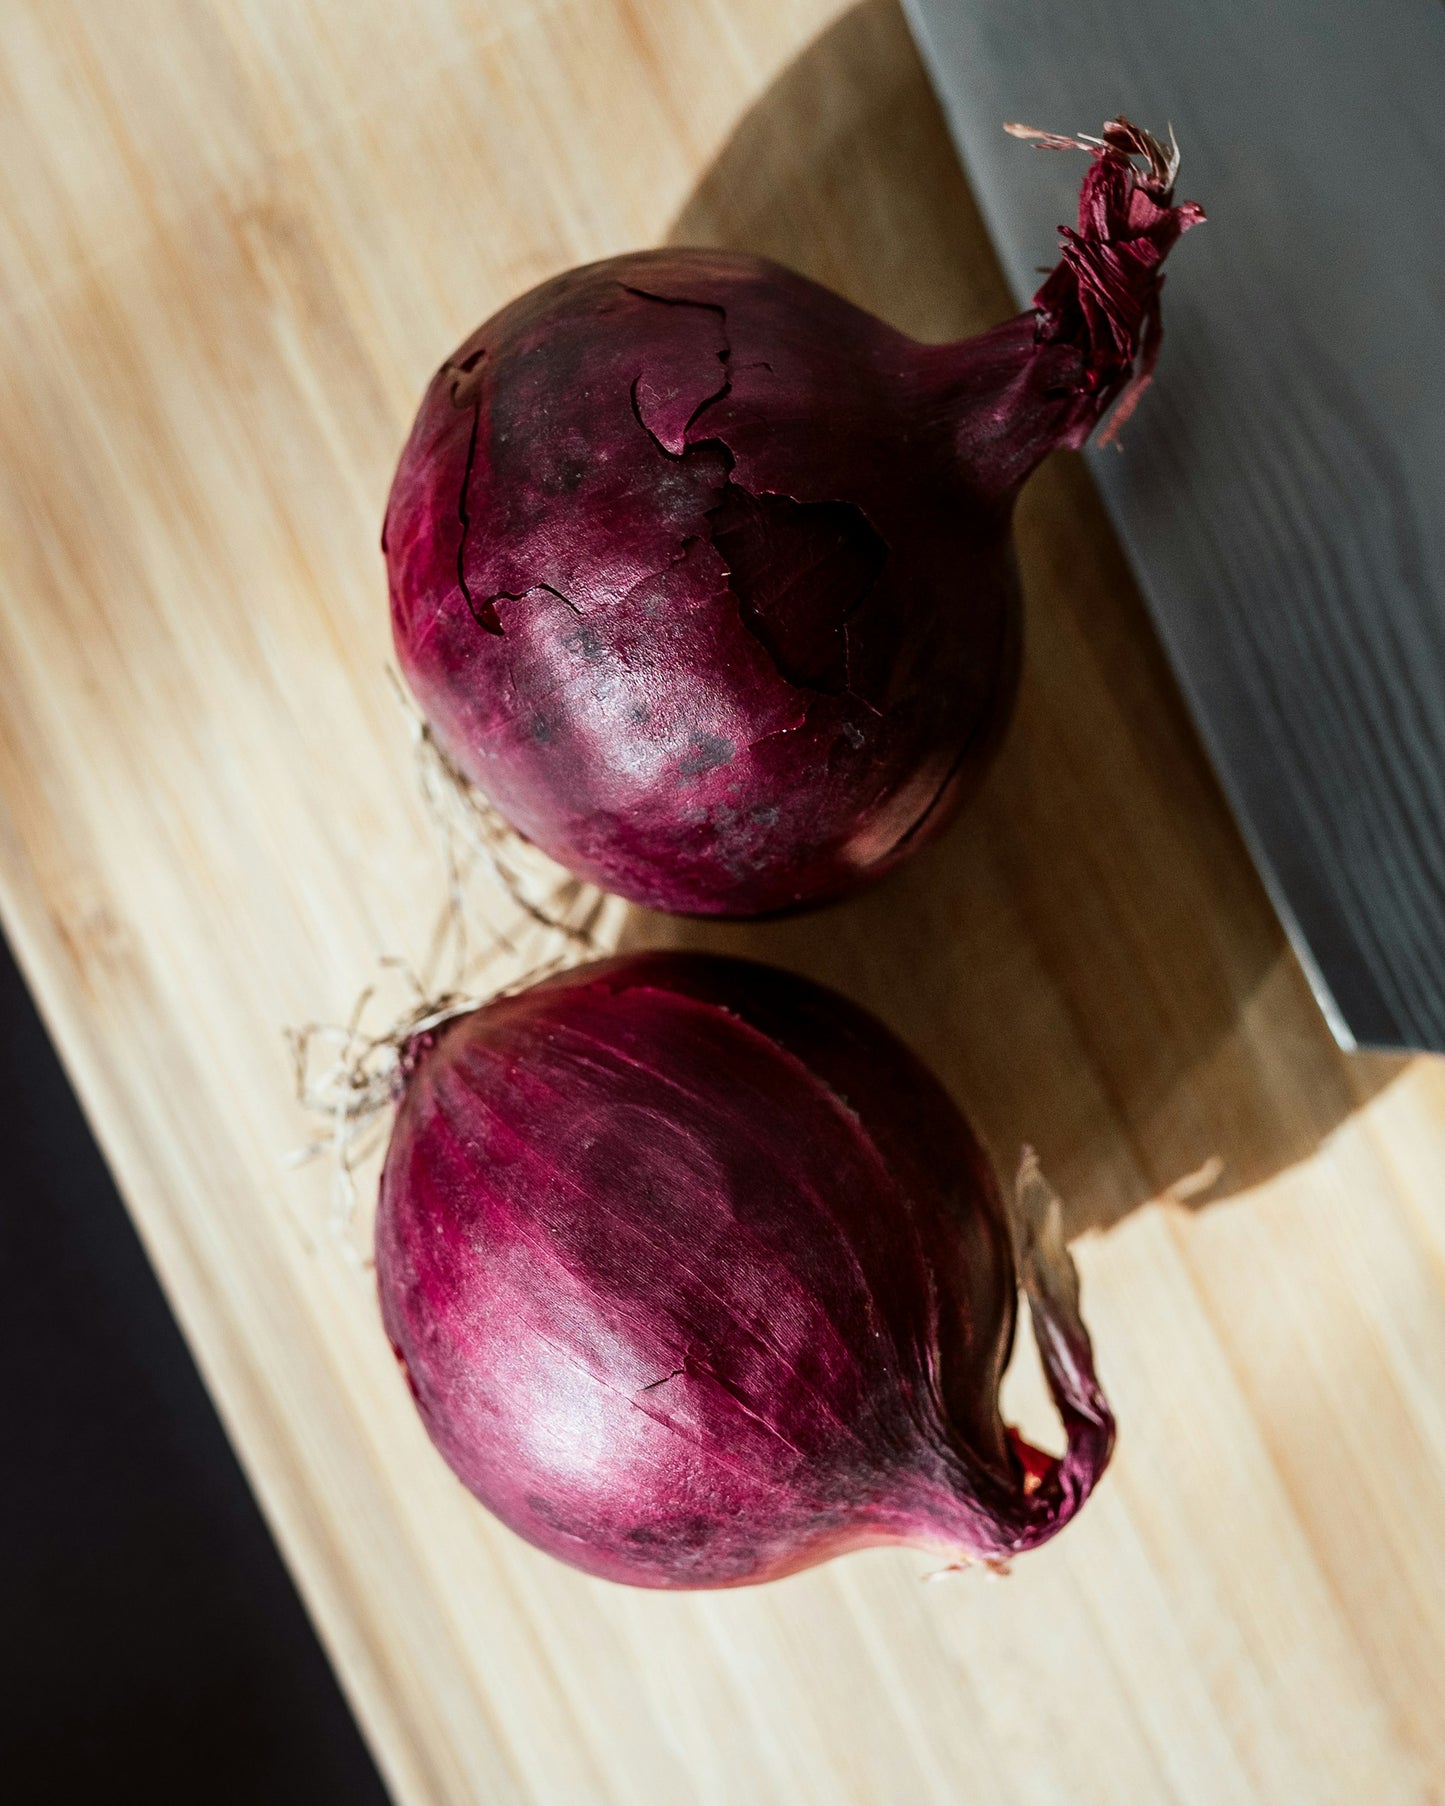 On display are 2 red onions, of the variety Short Red Creole. The red onions display their characteristic dark red shades. The onions are resting on a light wooden butcher block board.